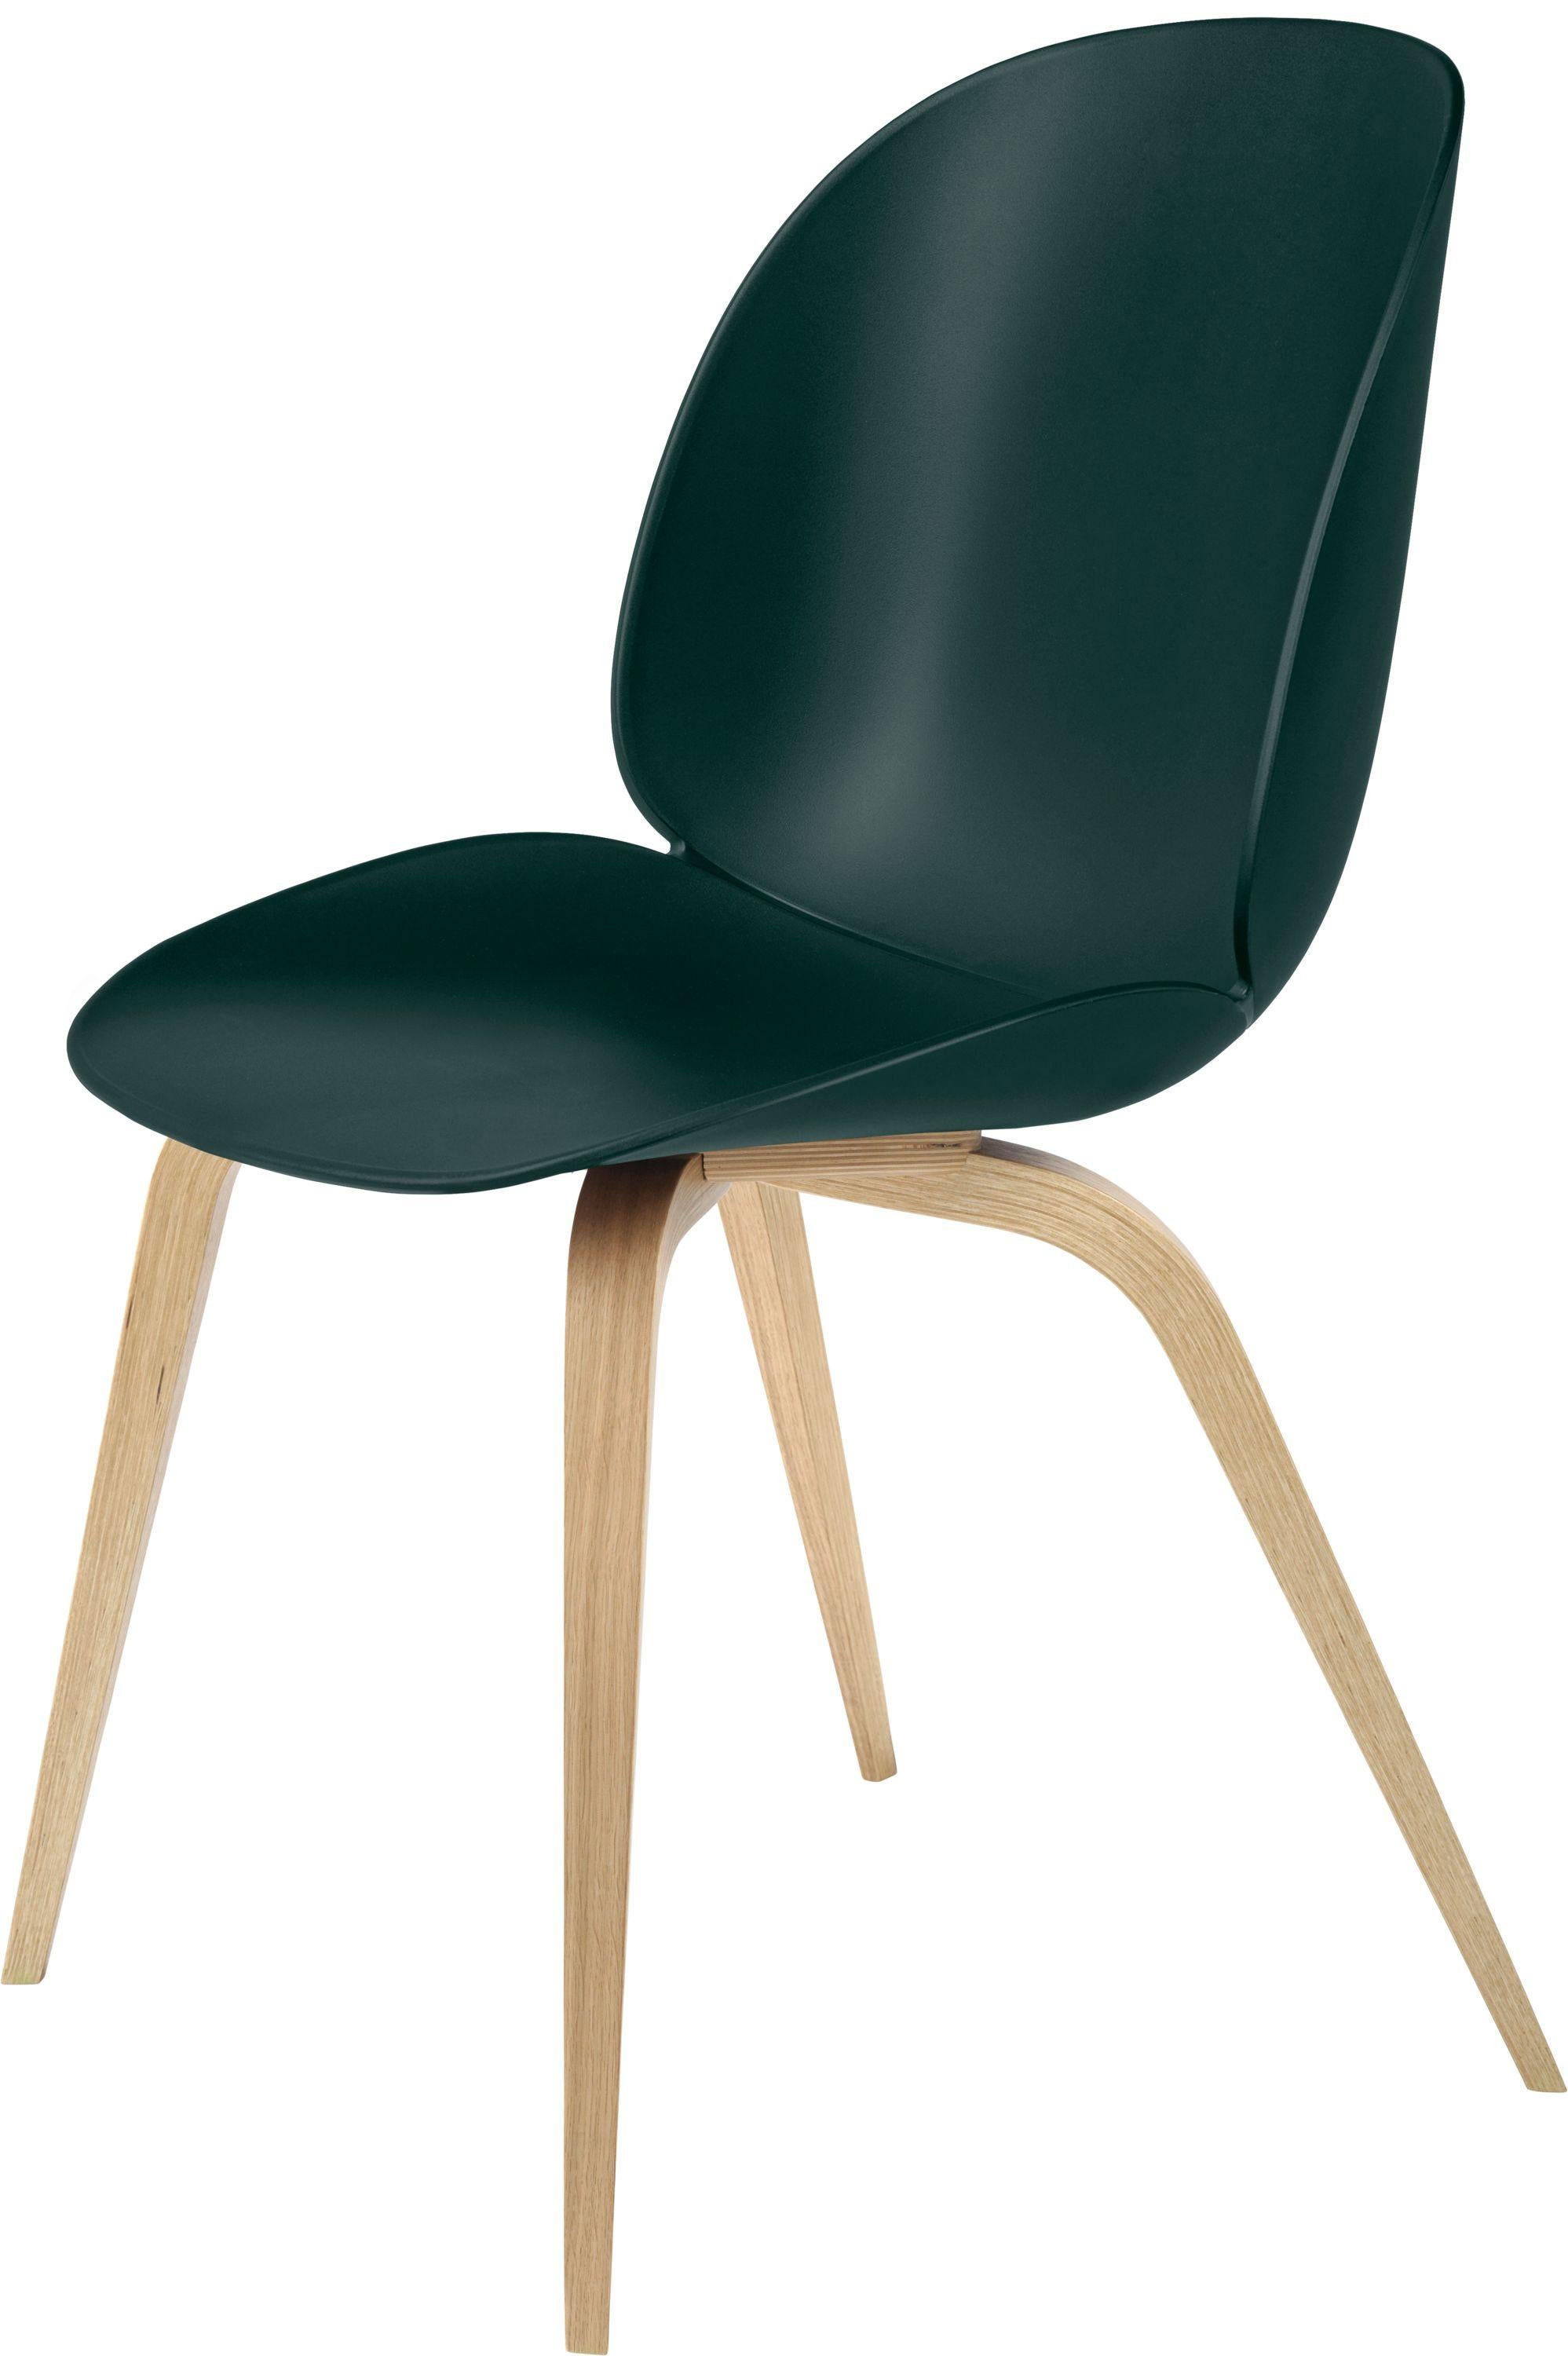 Contemporary GamFratesi 'Beetle' Dining Chair with Oak Conic Base